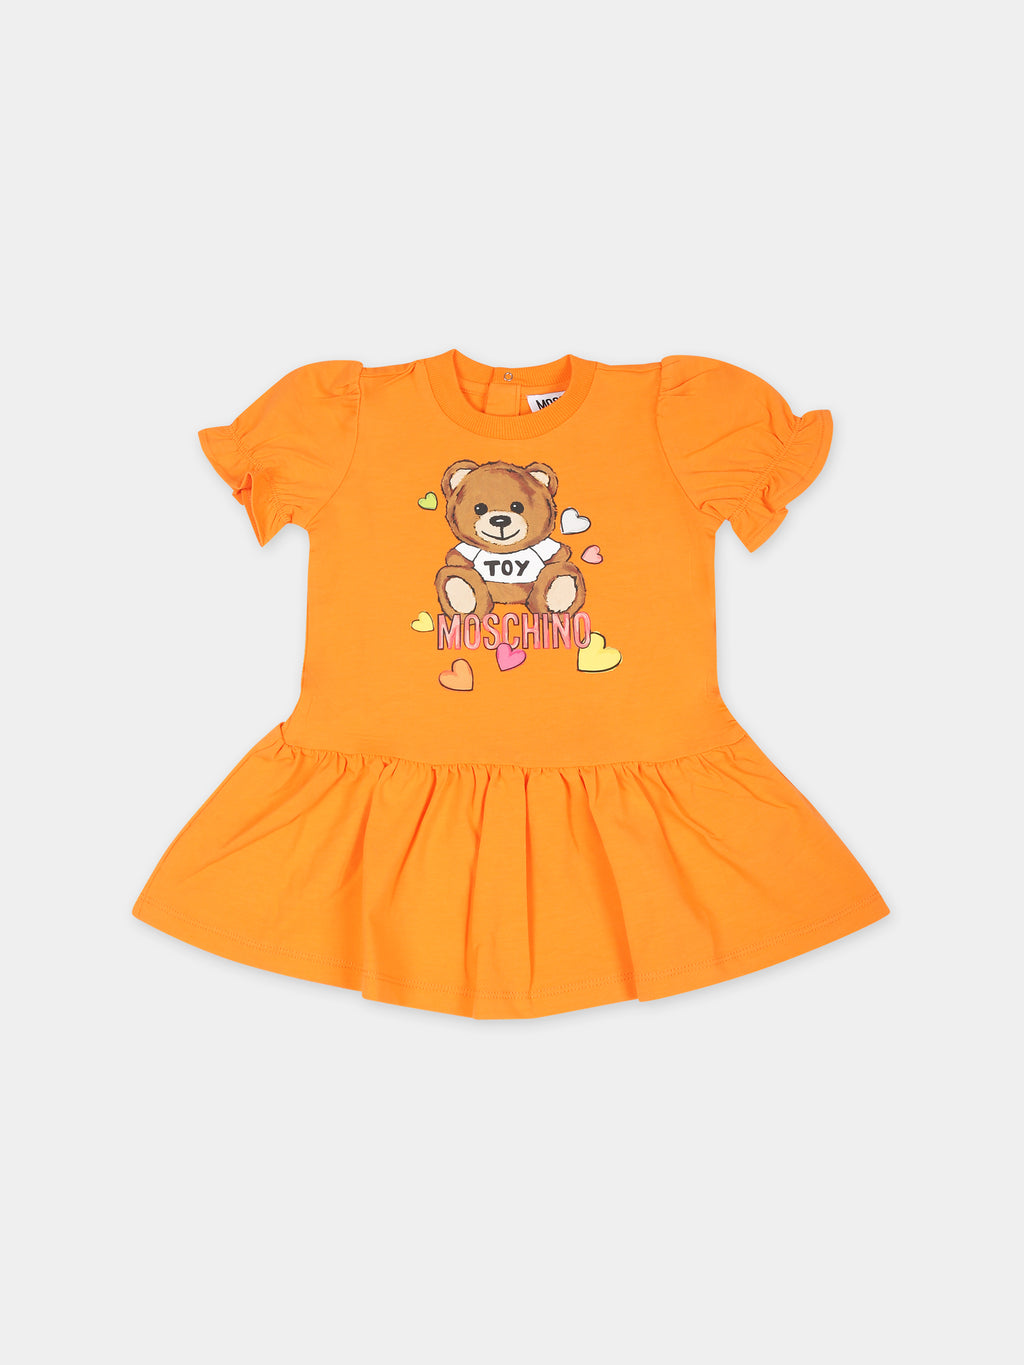 Orange dress for baby girl with Teddy Bear and hearts